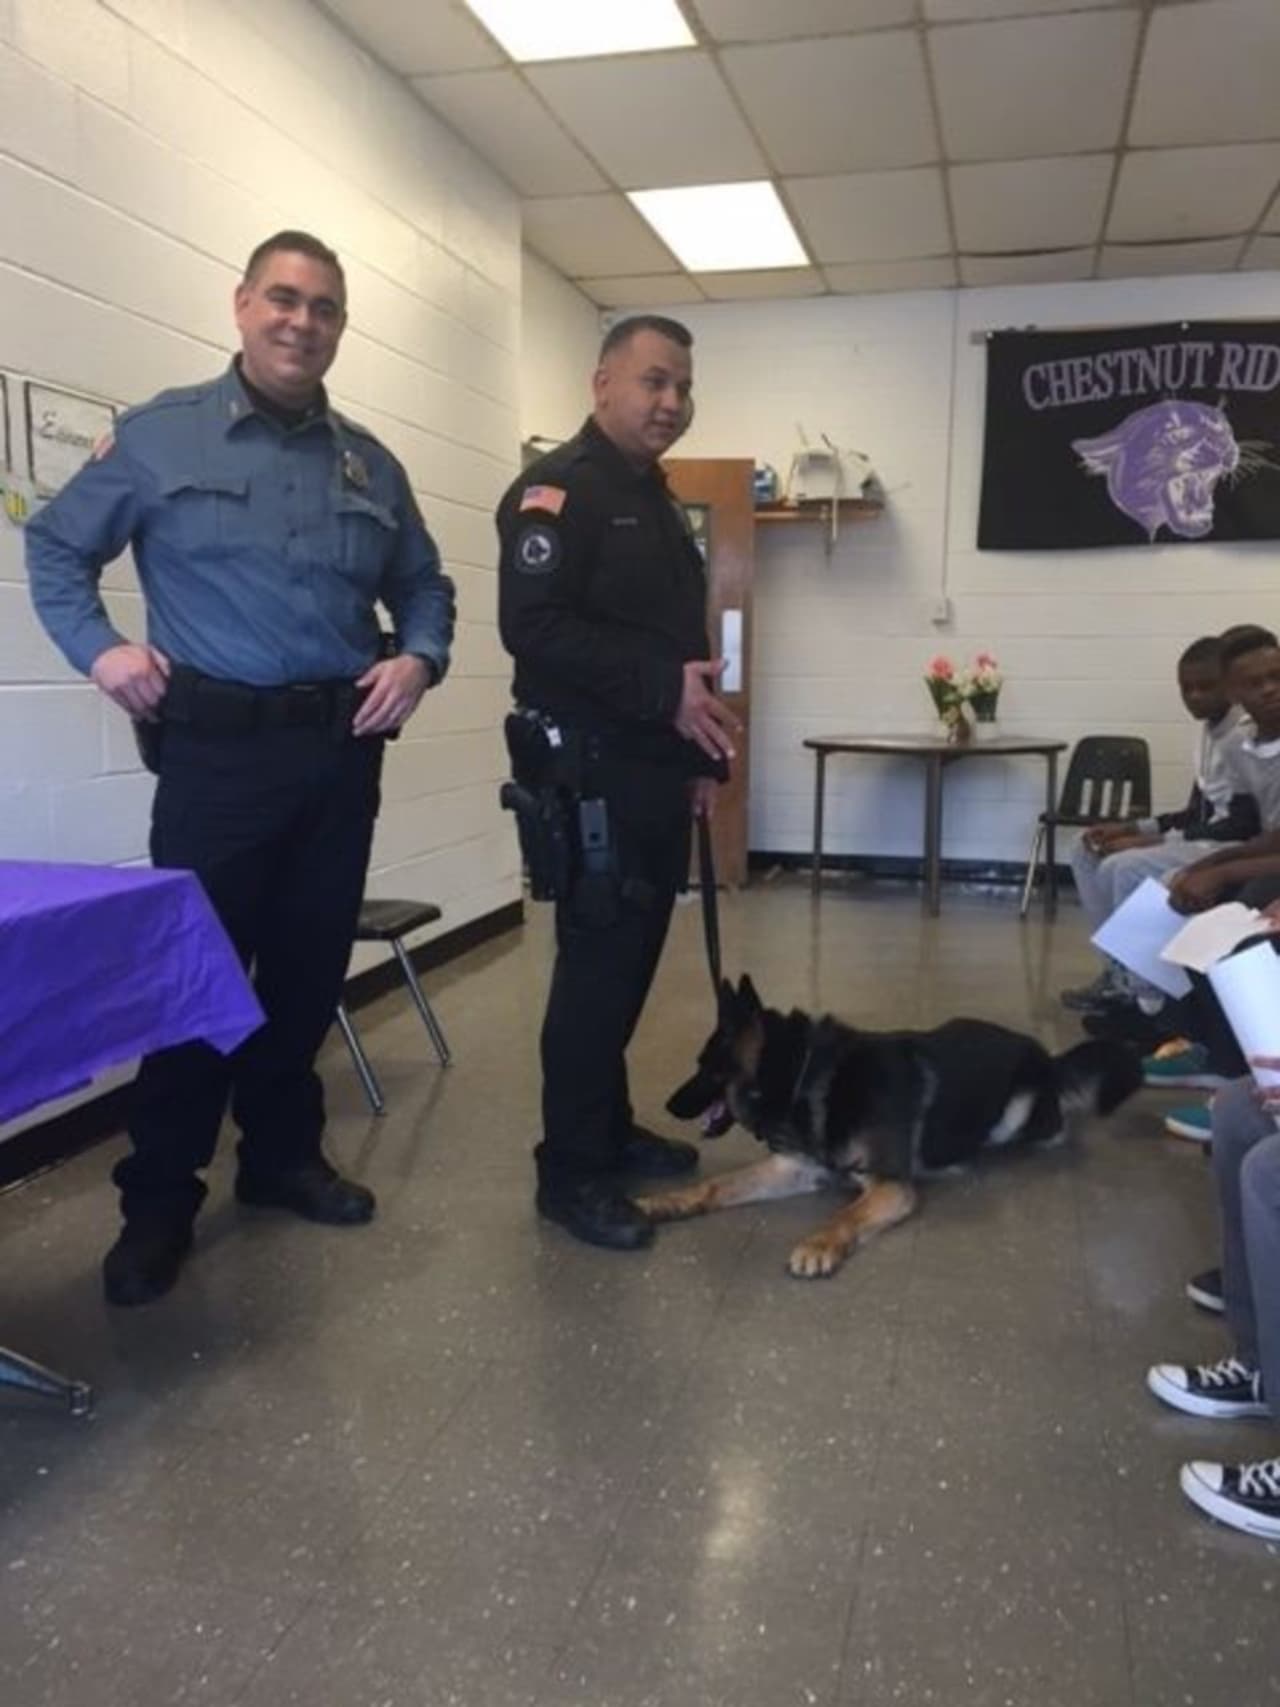 Ramapo police officers Omar Olayan, Andres Sanchez and K-9 partner, Rookie pay a Career Day visit to Chestnut Ridge Middle School.